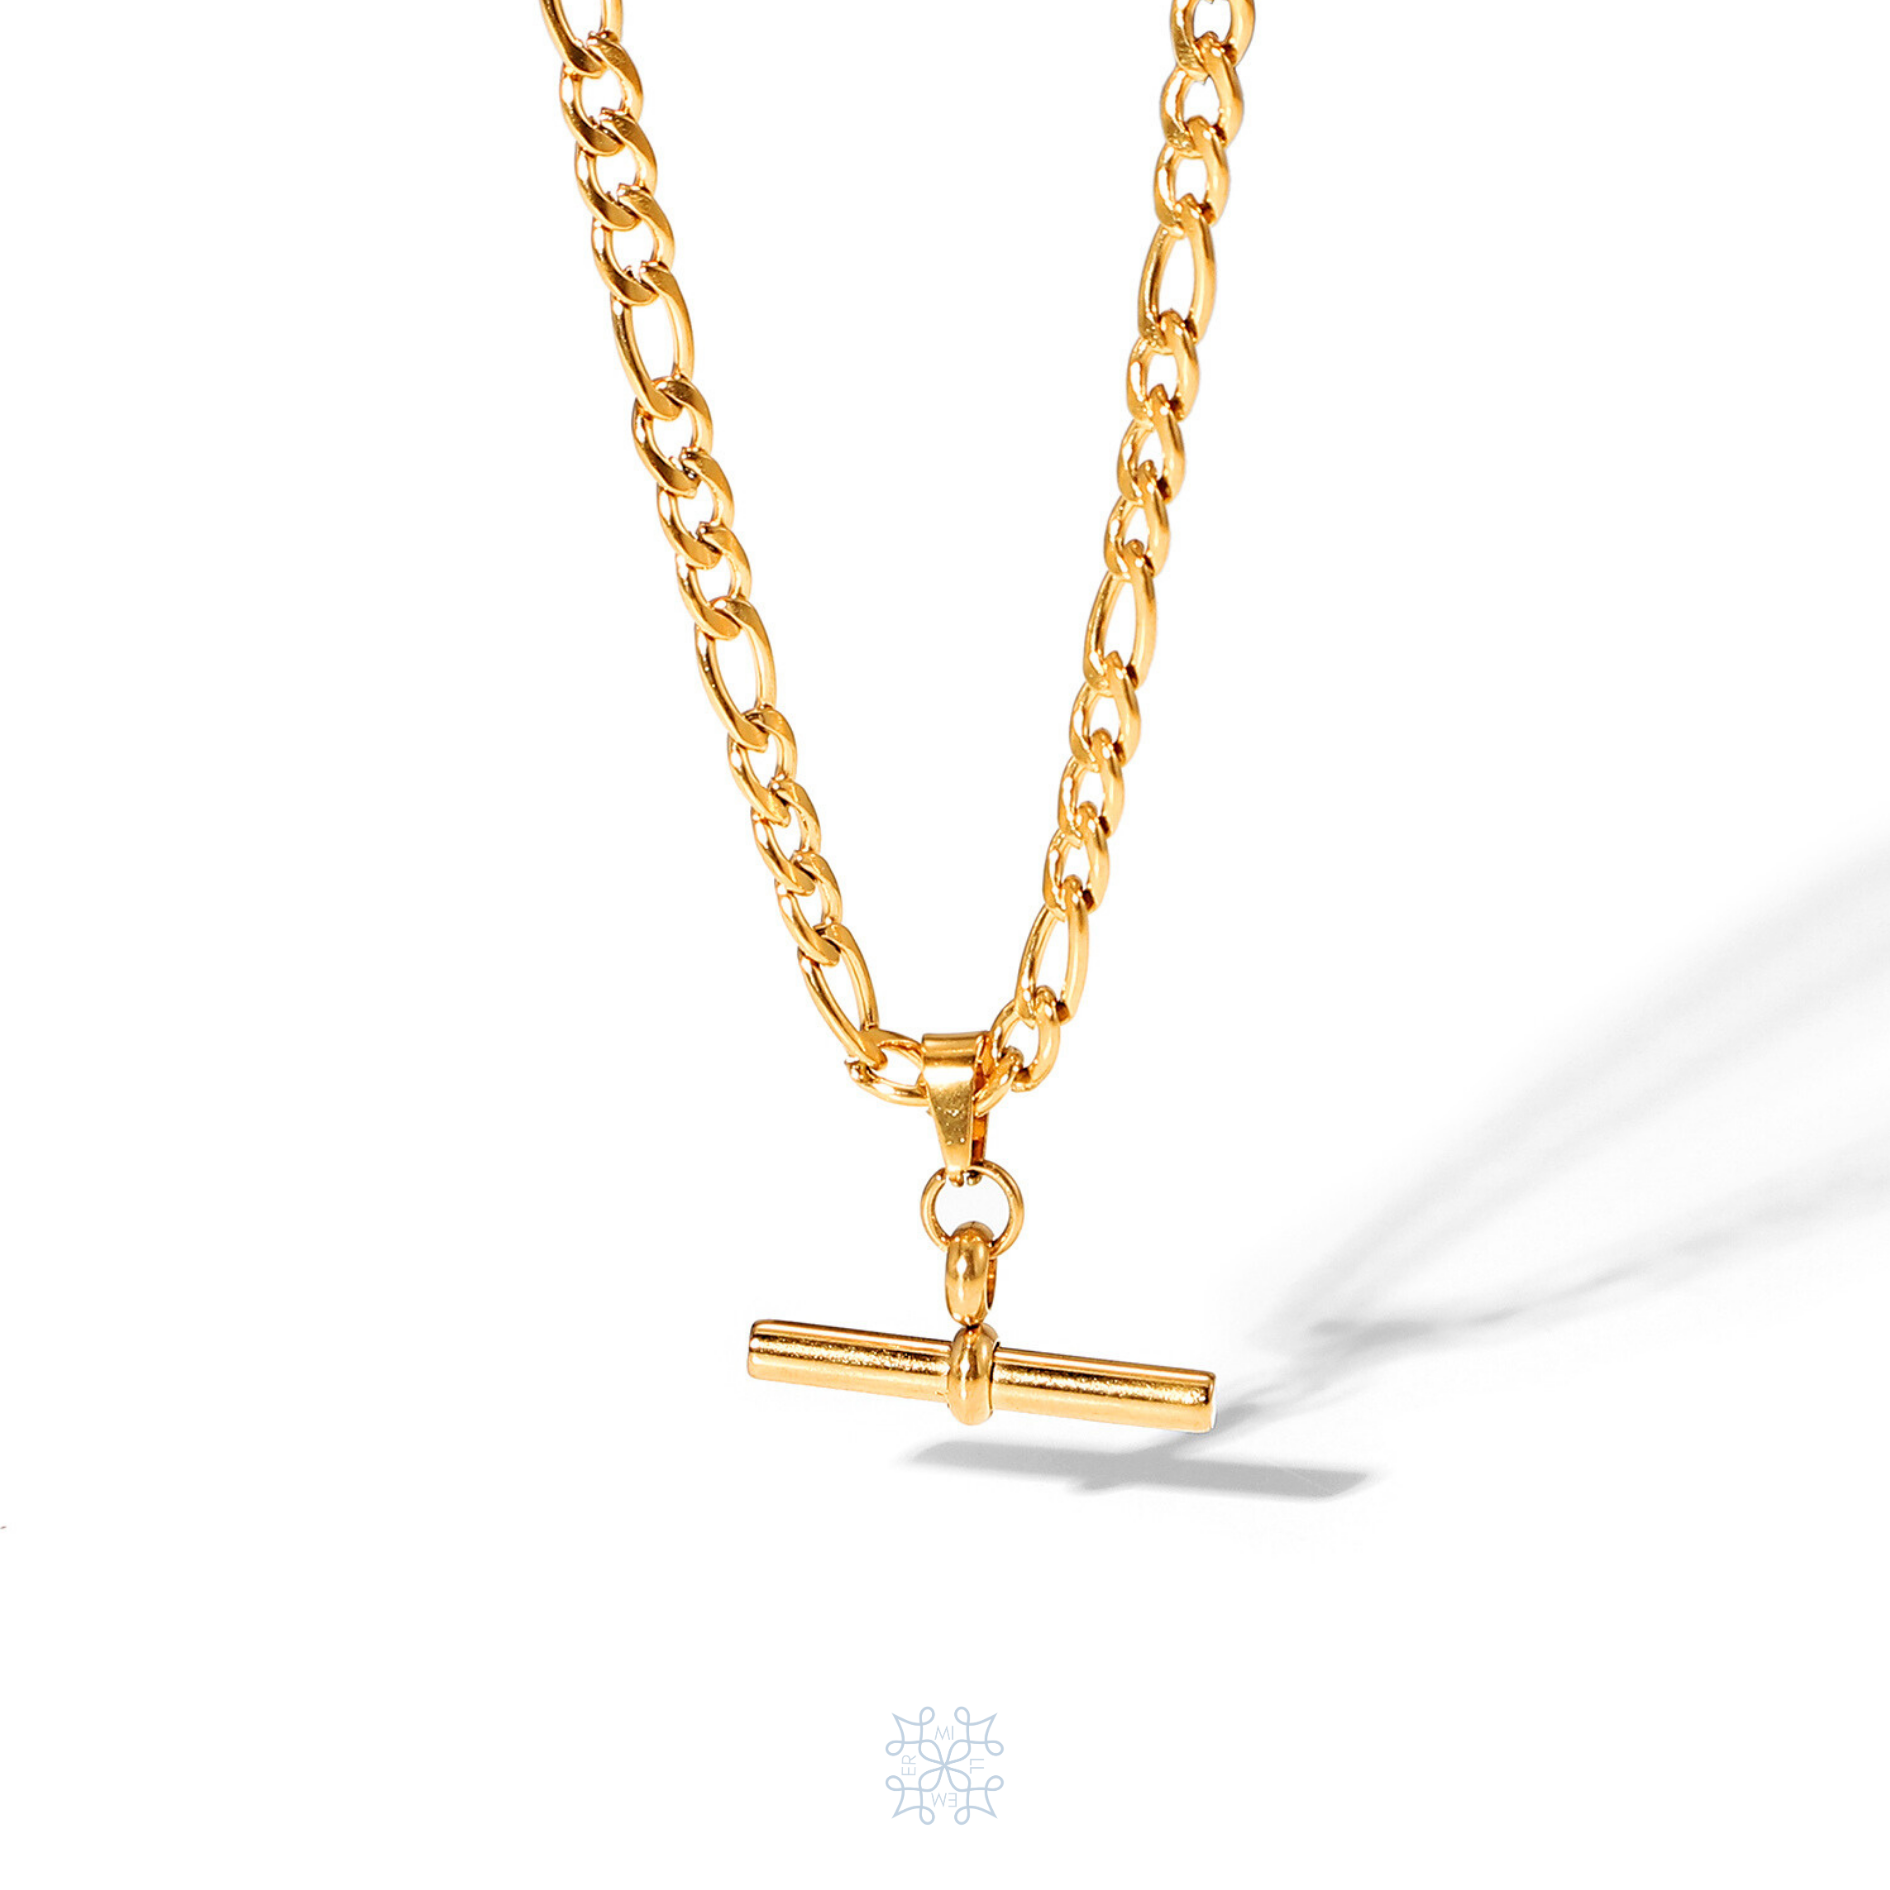 Figaro chain gold necklace with a T shape pendant hanging at the middle of the necklace.